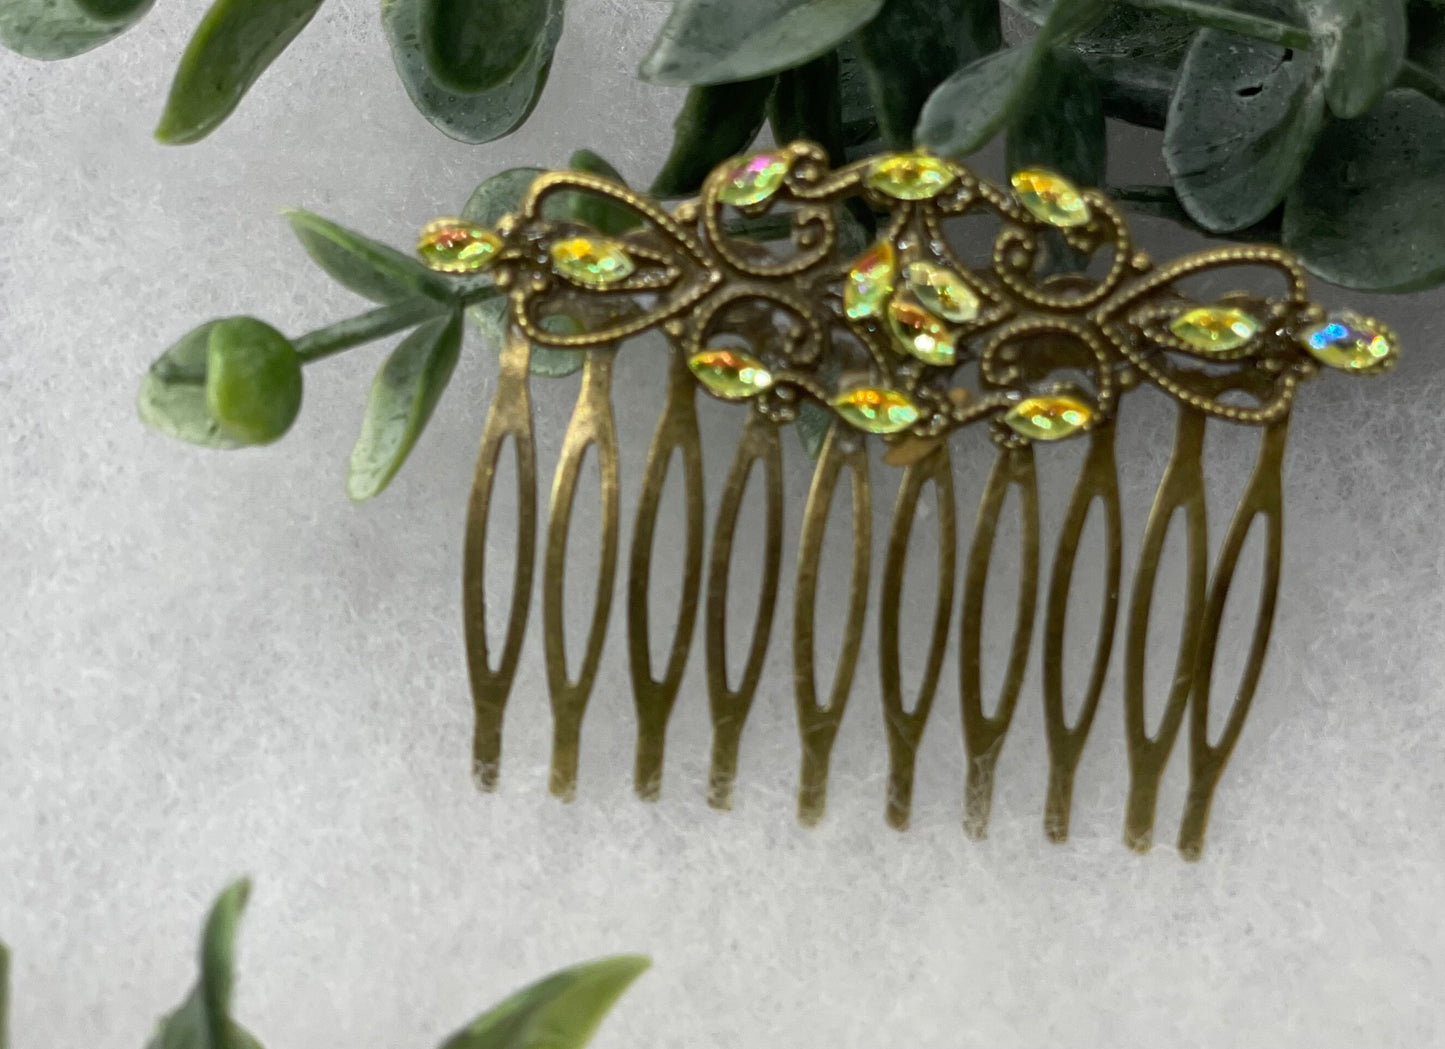 Yellow iridescent crystal vintage style antique hair accessories gift birthday event formal bridesmaid  2.5” Metal side Comb #253